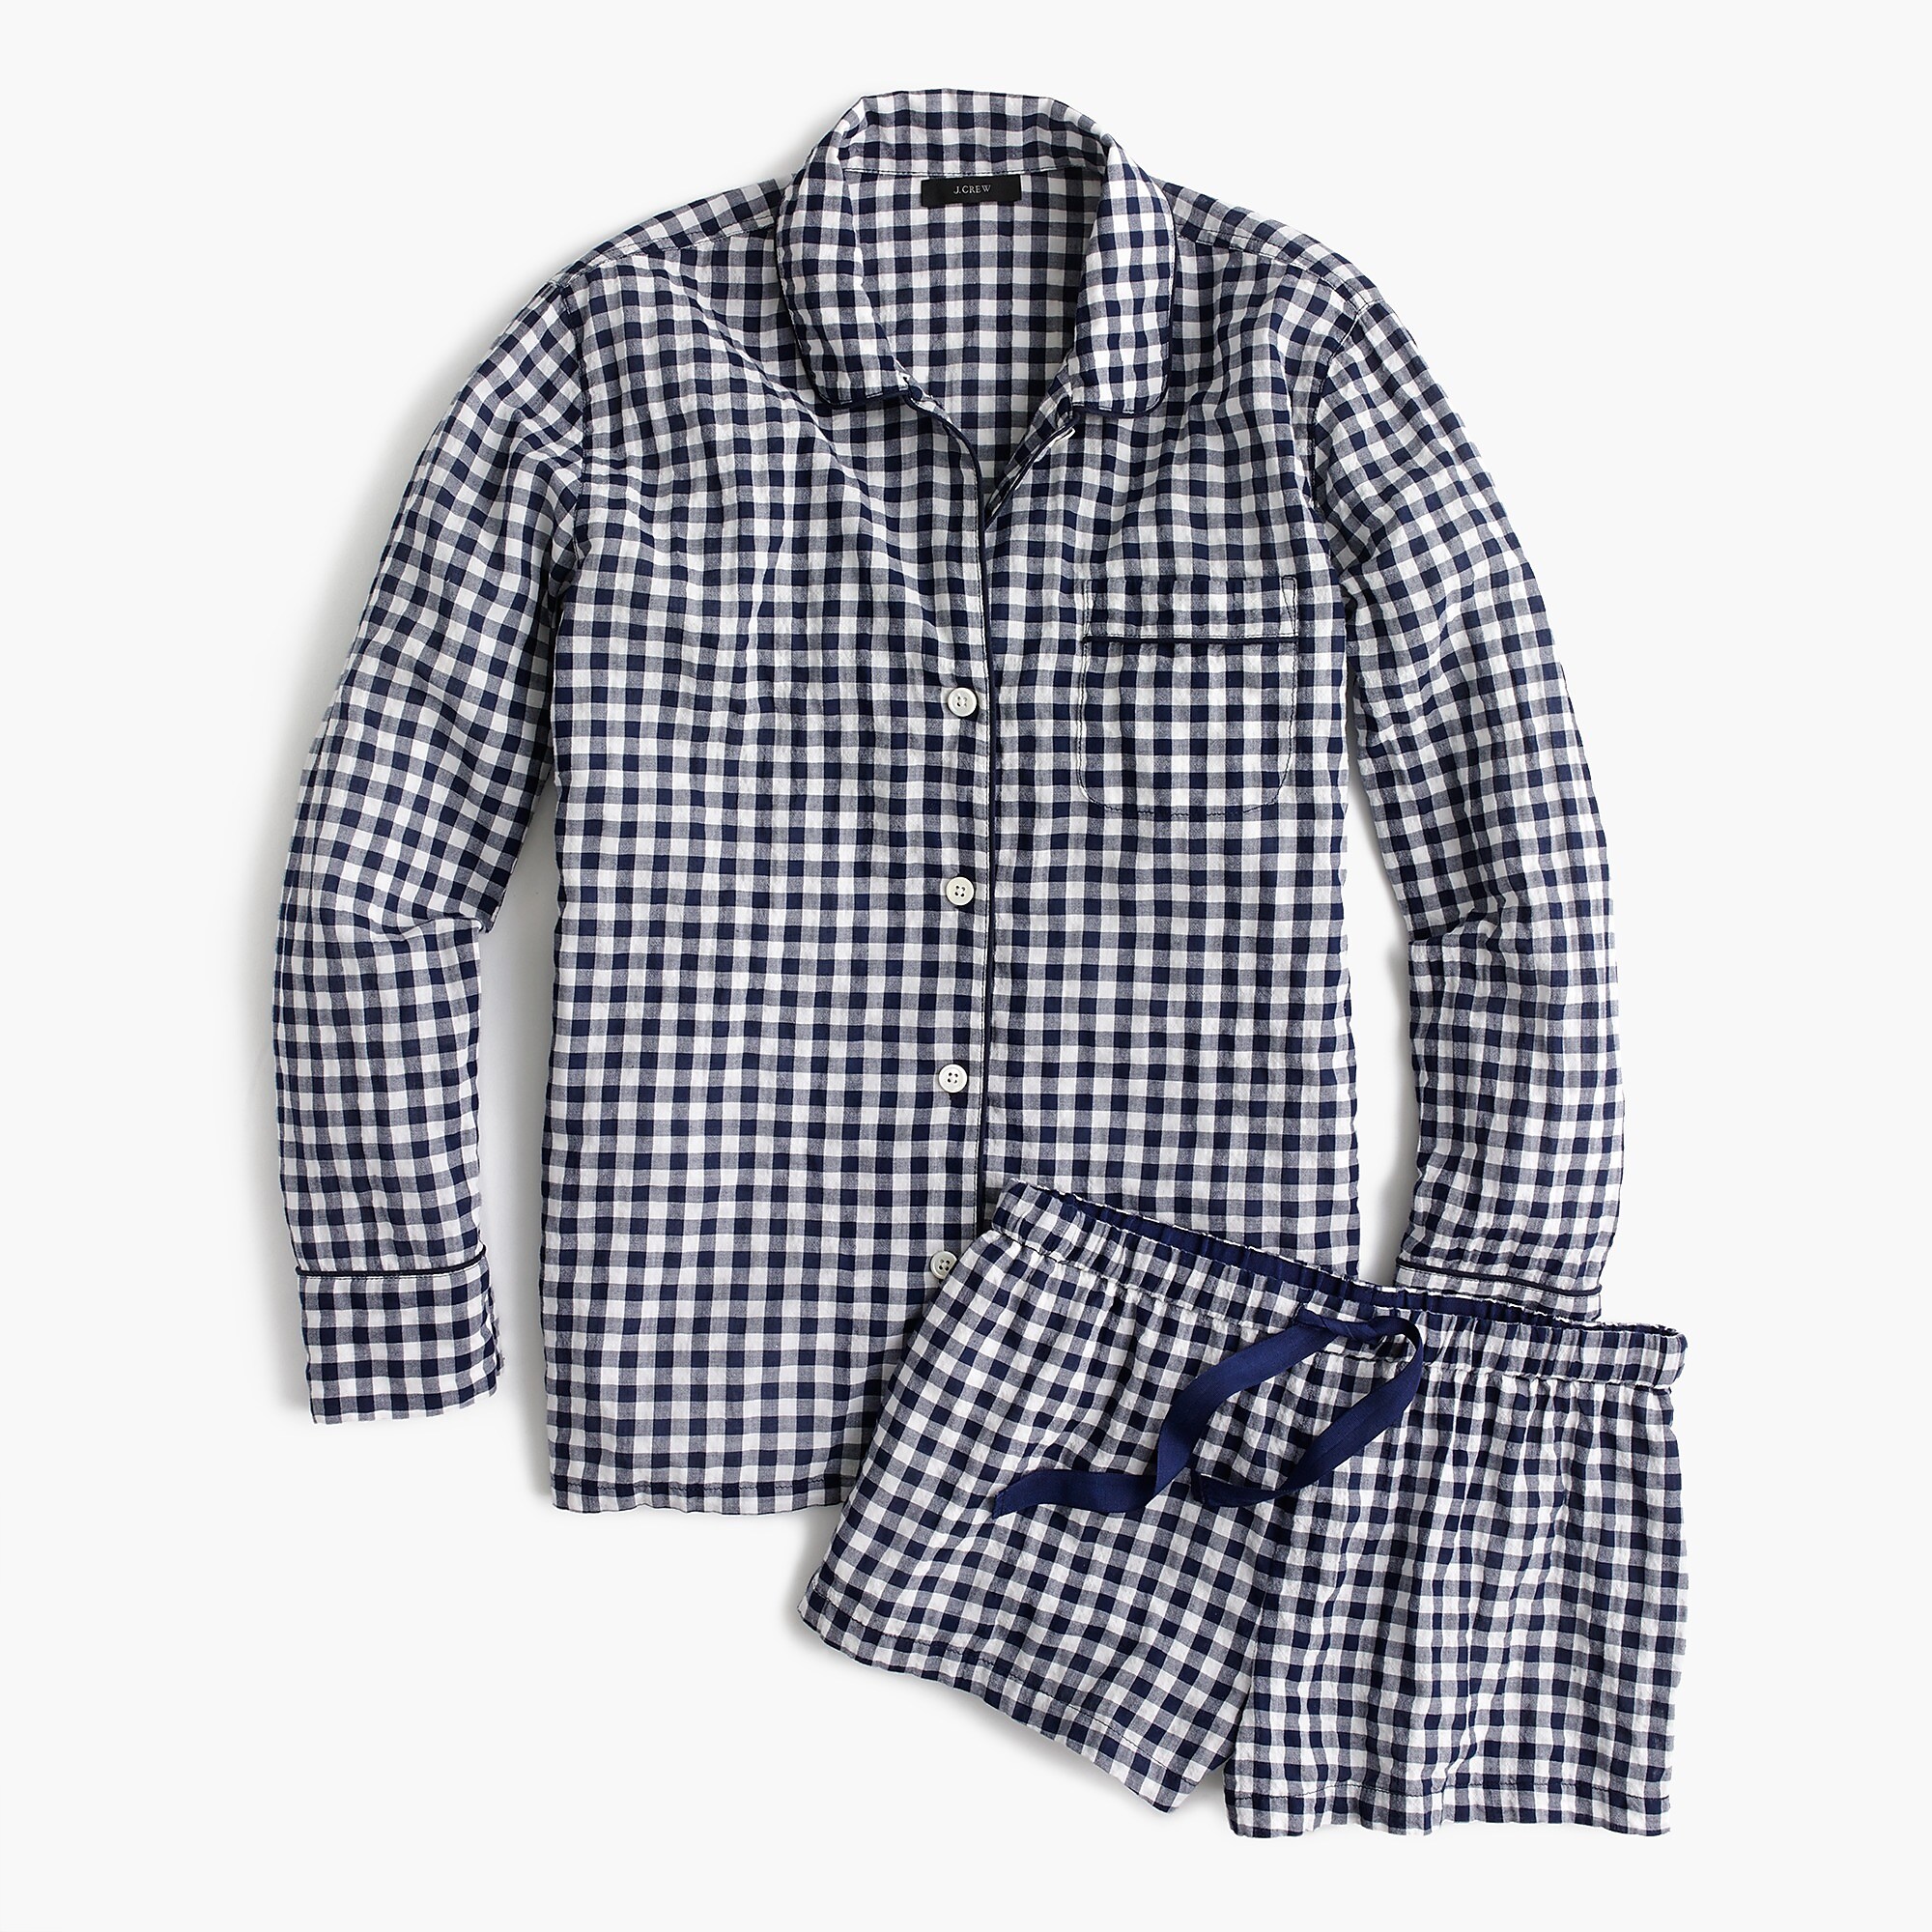 Shop J.Crew for the Cotton pajama set in gingham for Women. 